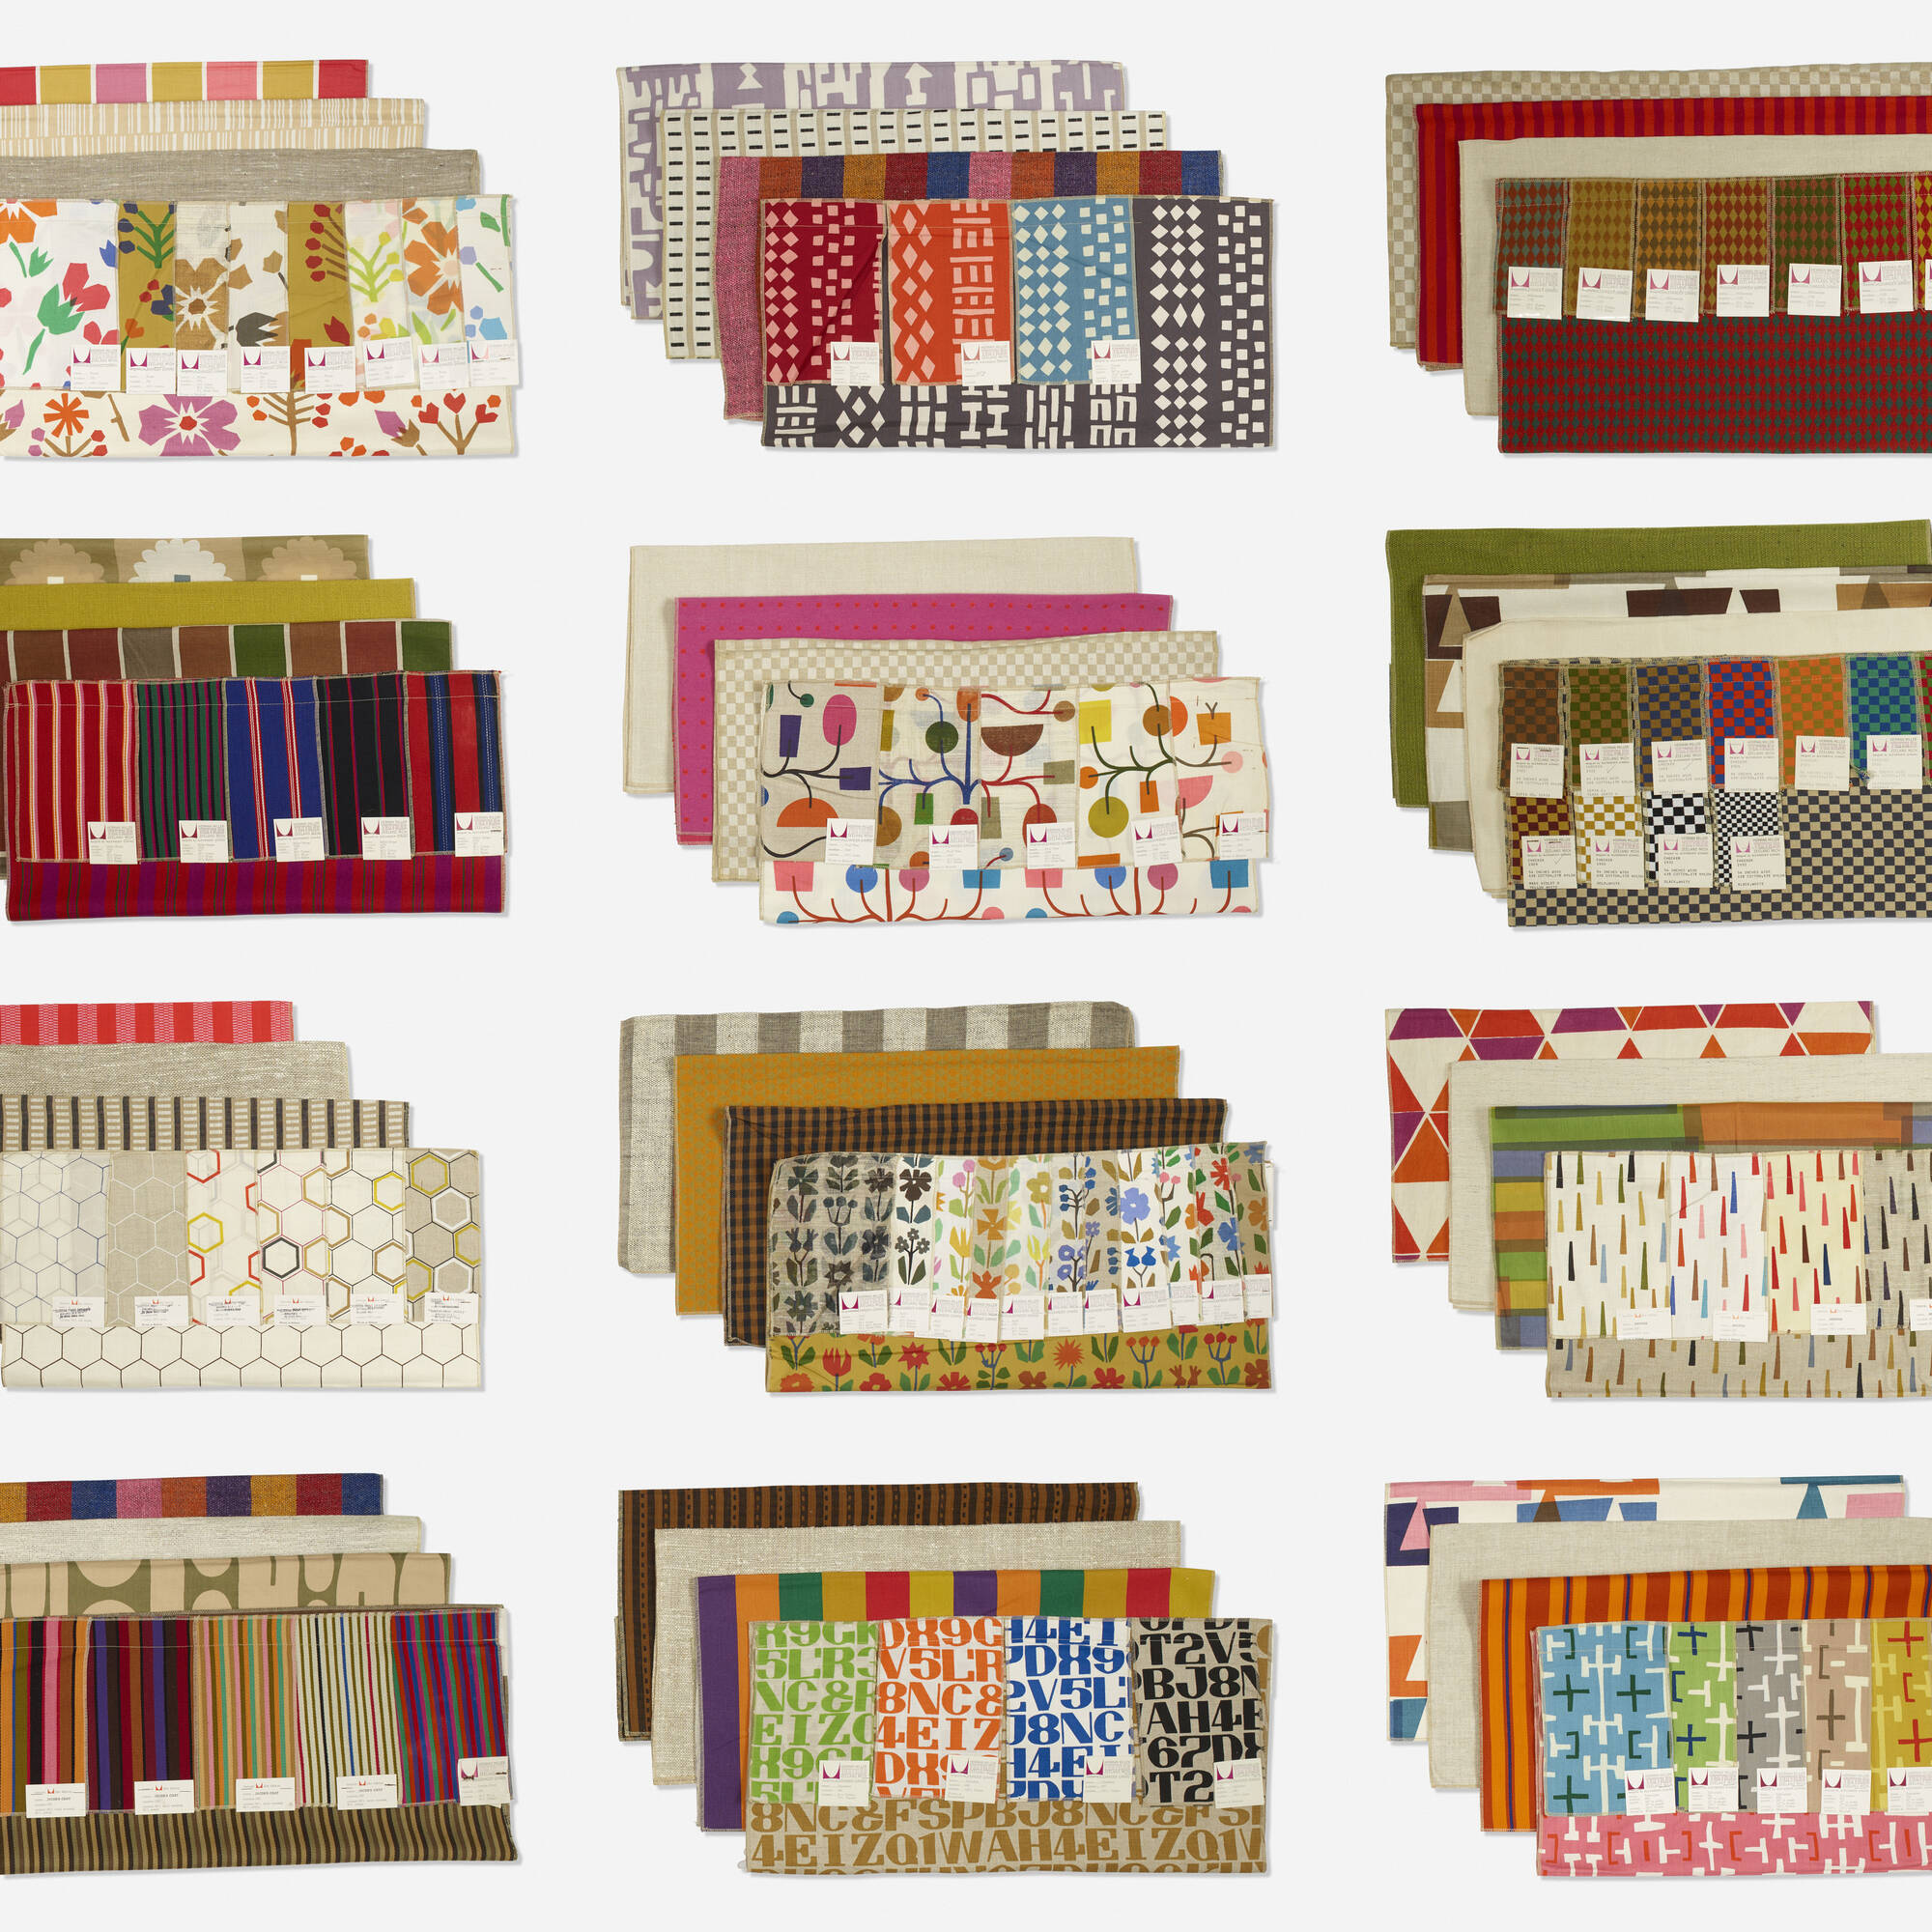 323: ALEXANDER GIRARD, Important collection of fabric samples 